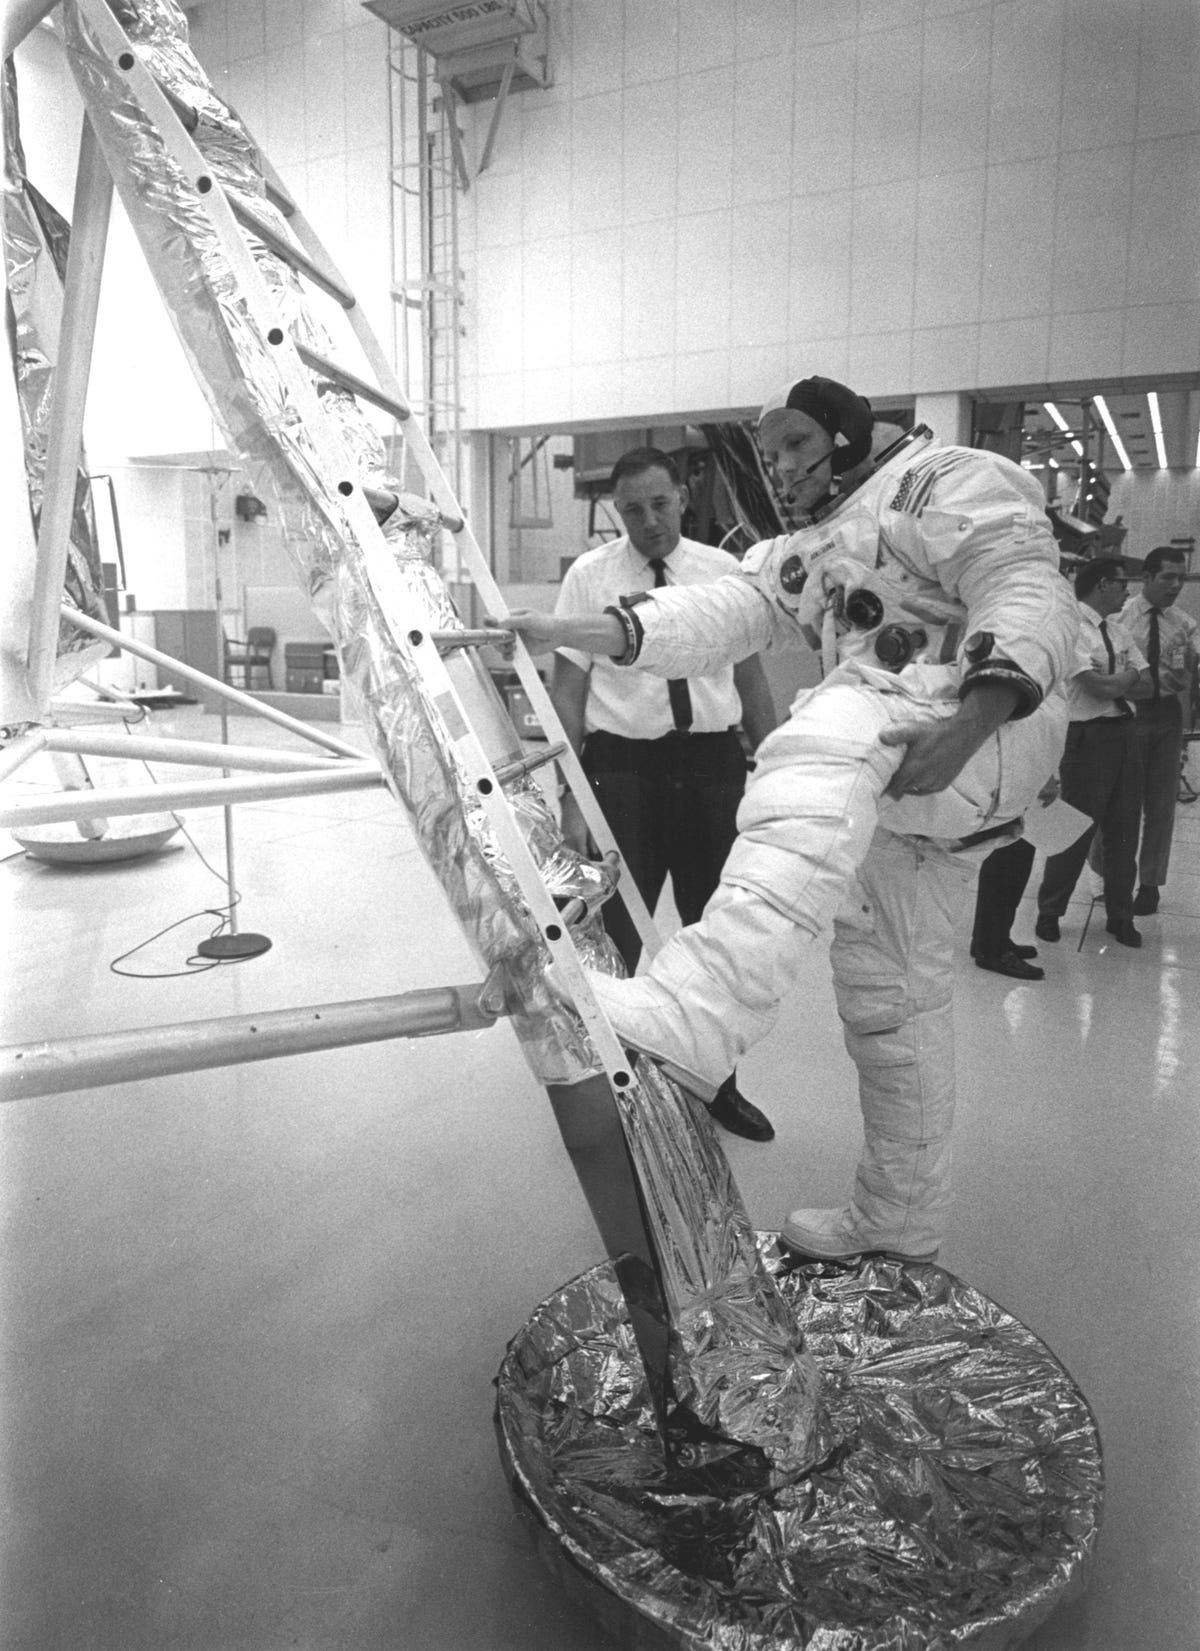 Dressed in his EVA spacesuit, Neil Armstrong practices climbing up onto the ladder of the LEM.